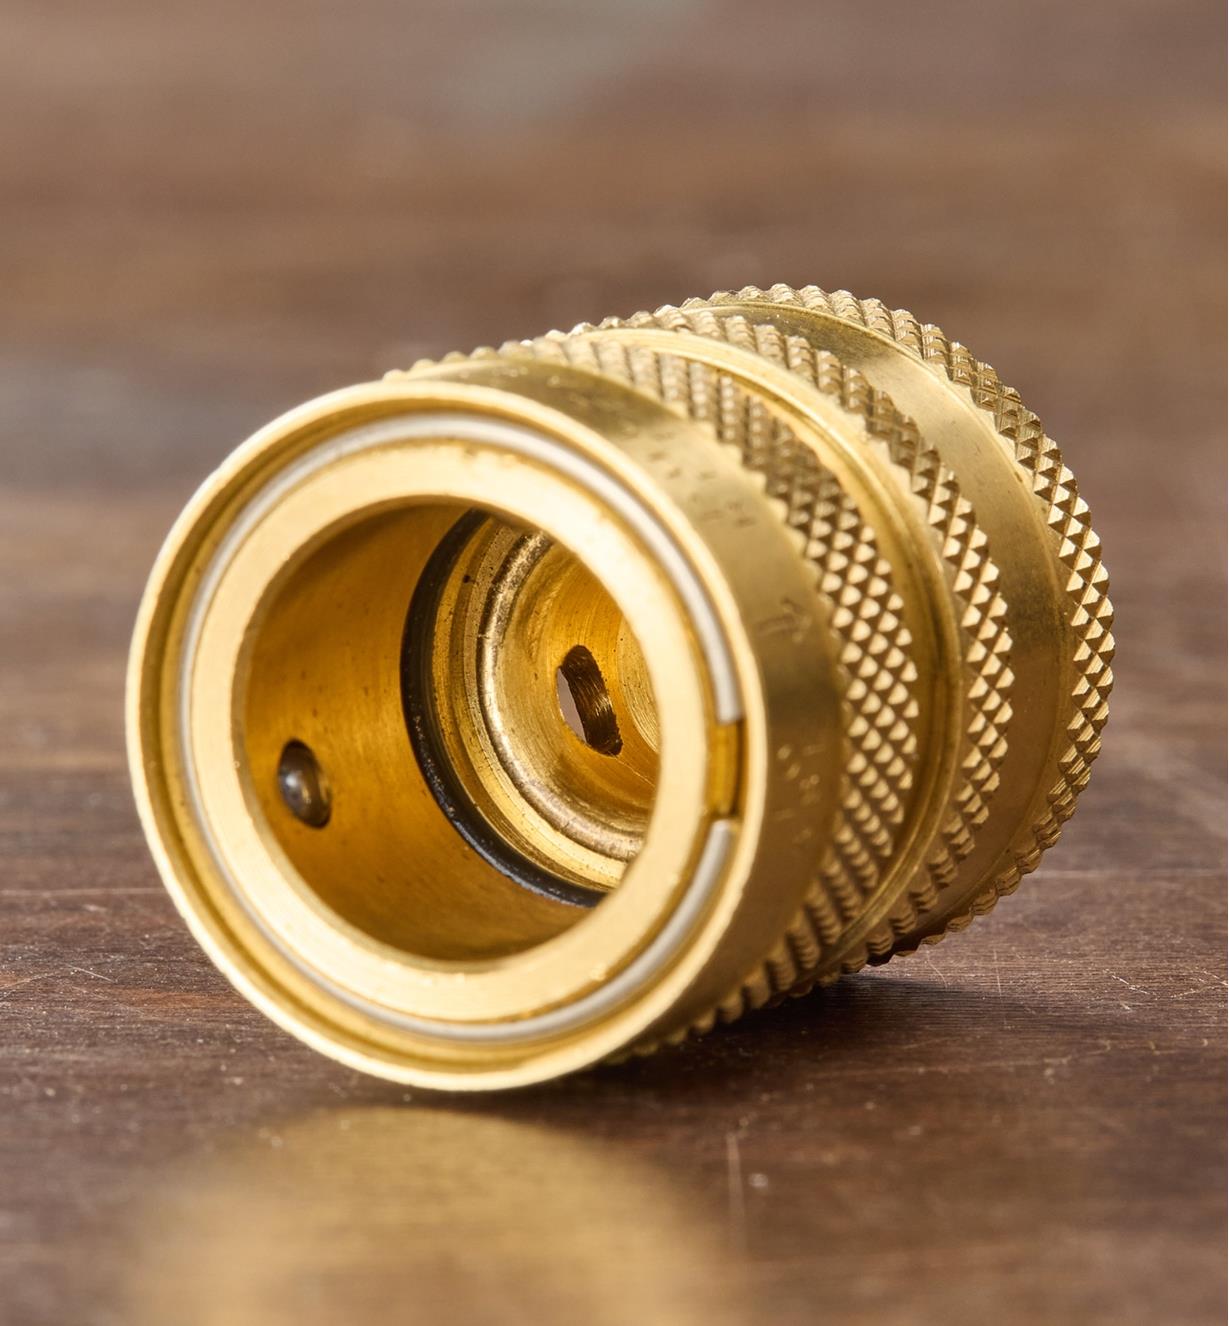 The brass water-stop female coupler sits on a wood surface